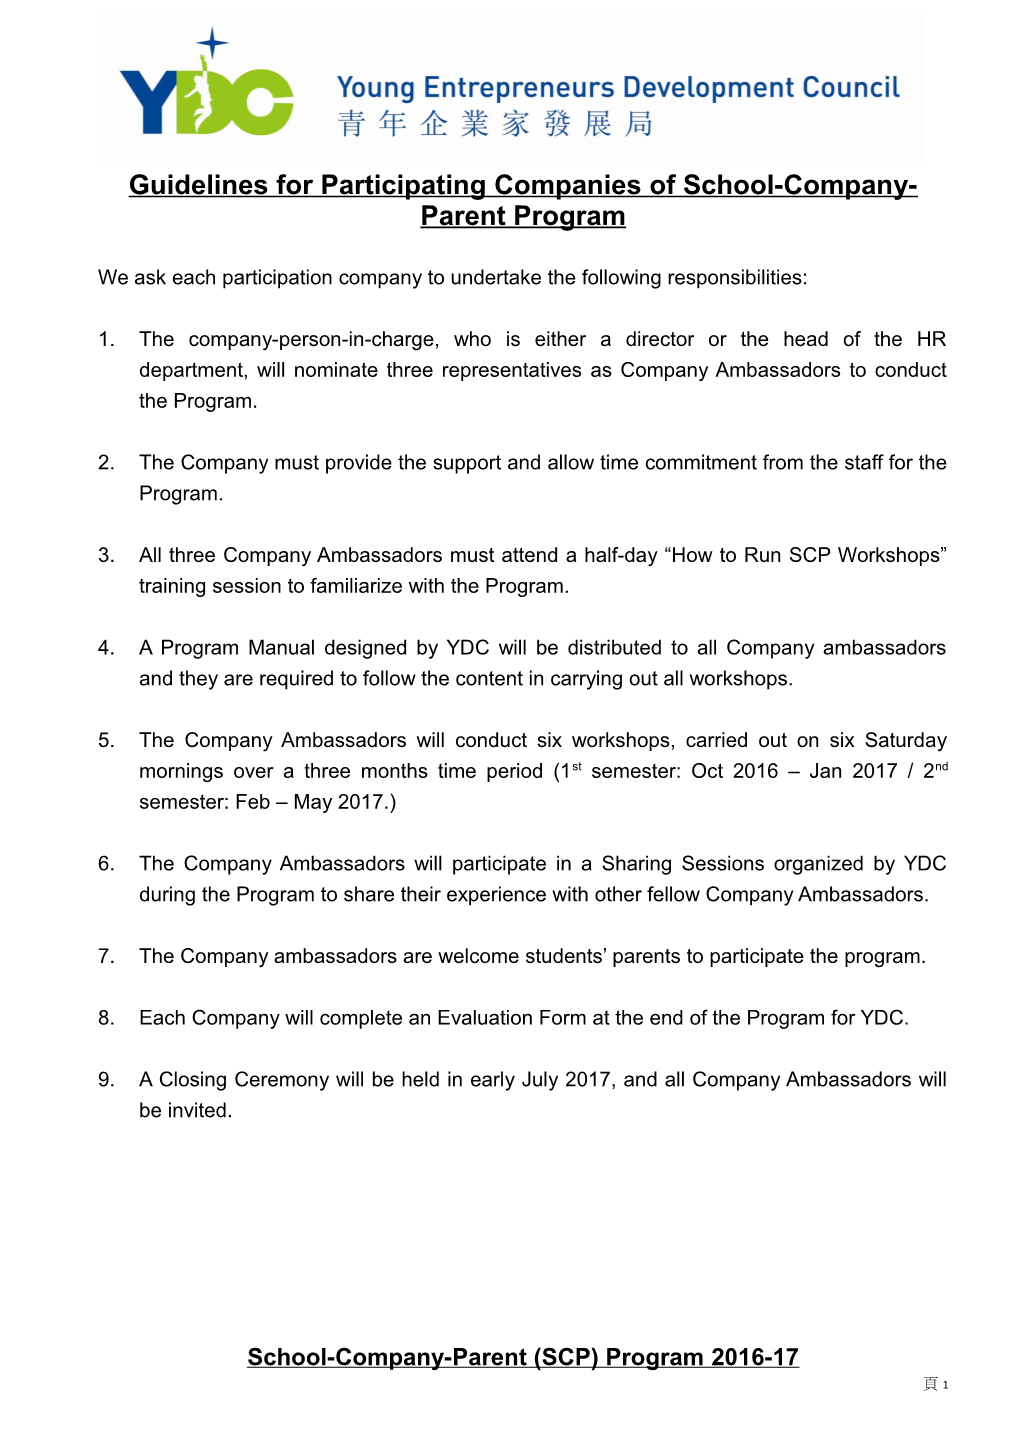 Guidelines for Participating Companies of School-Company-Parent Program